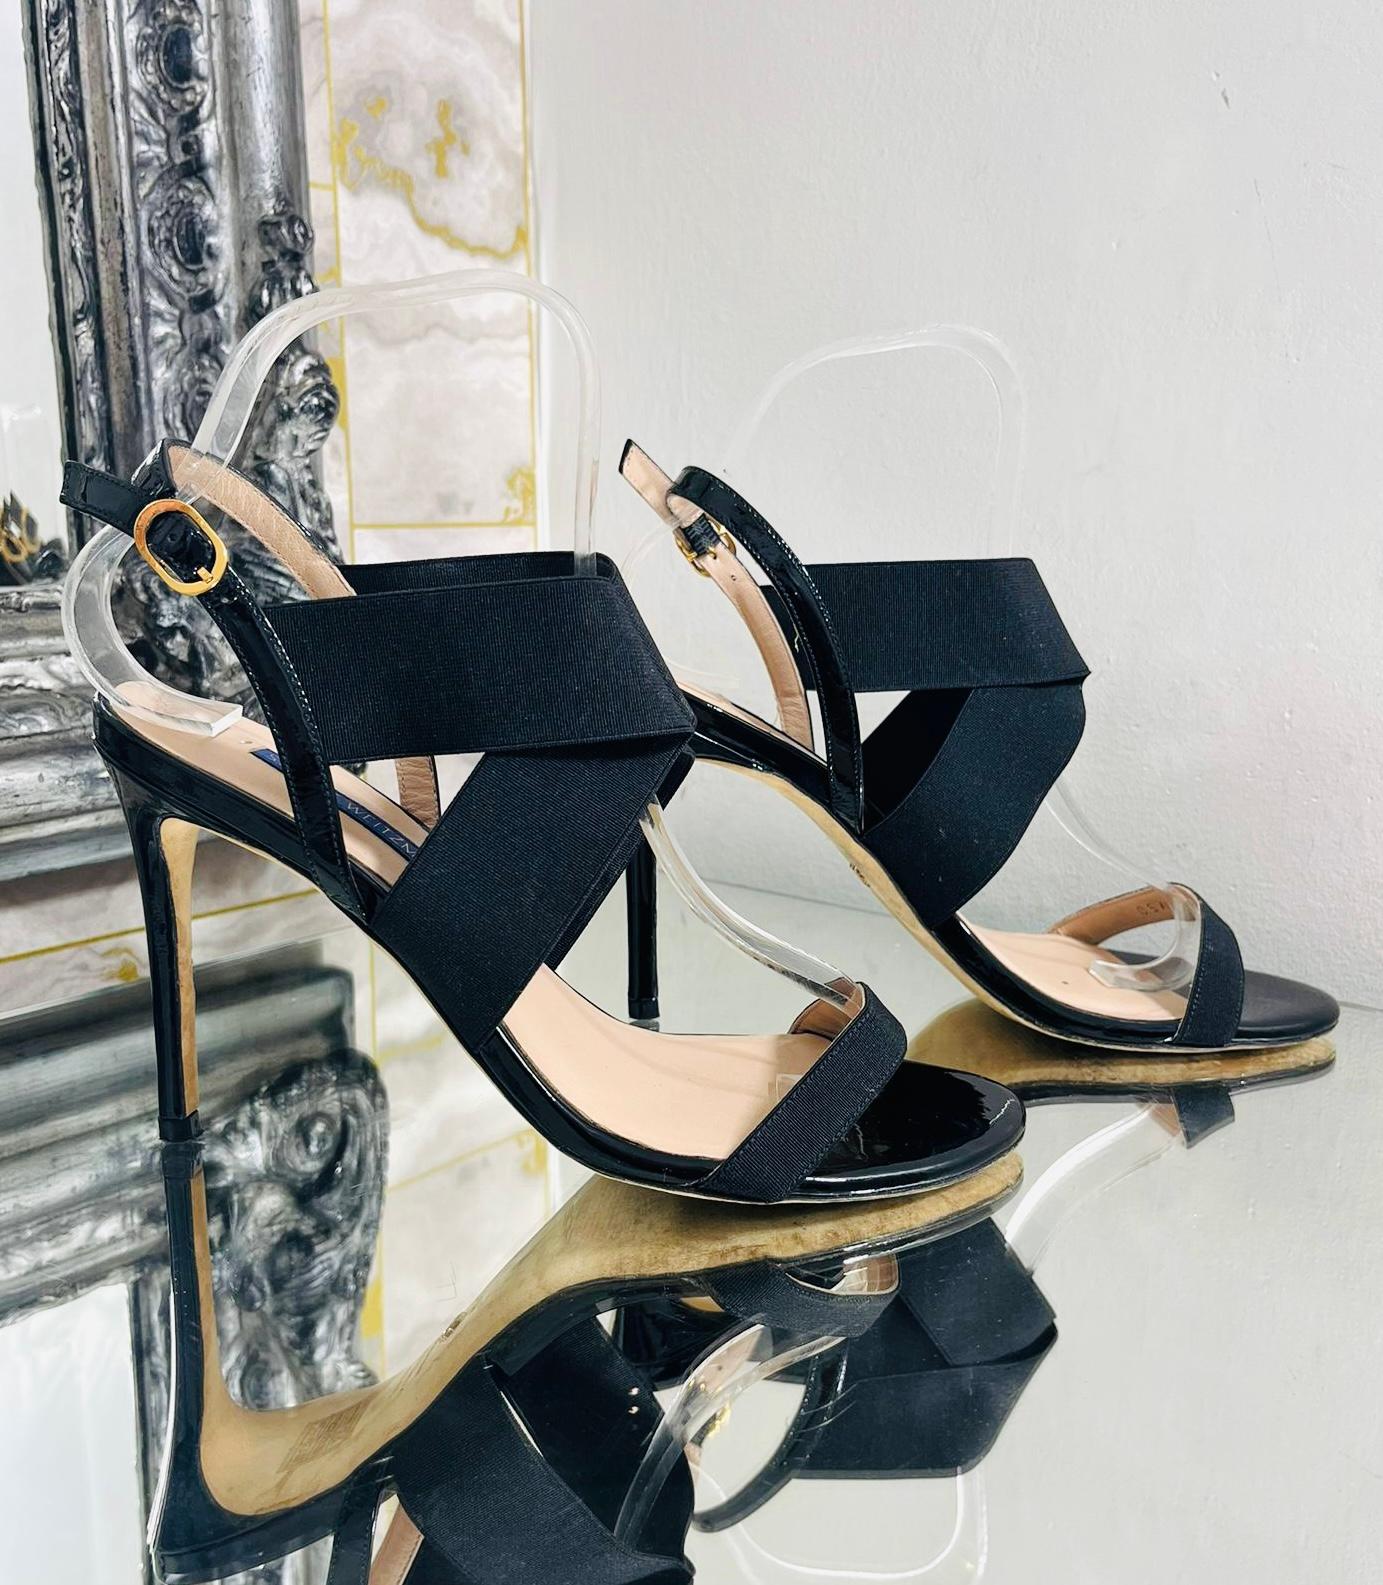 Stuart Weitzman Cross Strap Patent Leather Sandals In Excellent Condition For Sale In London, GB